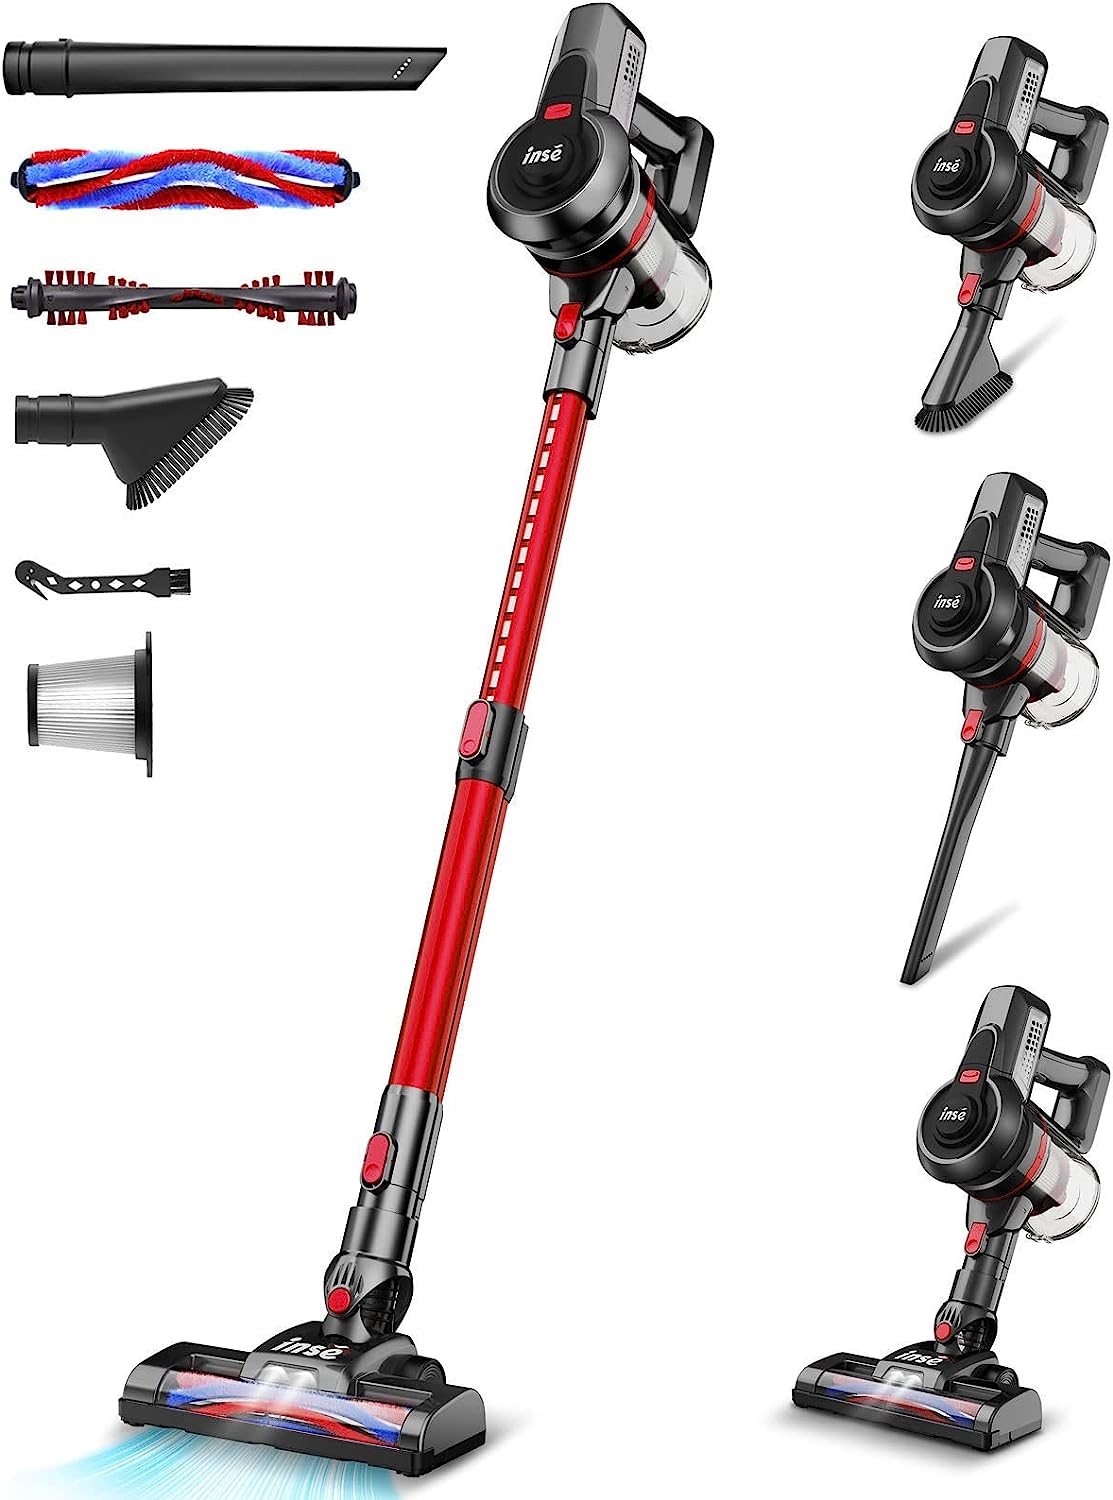 INSE Cordless Vacuum Cleaner, 6-in-1 Powerful Stick [...]